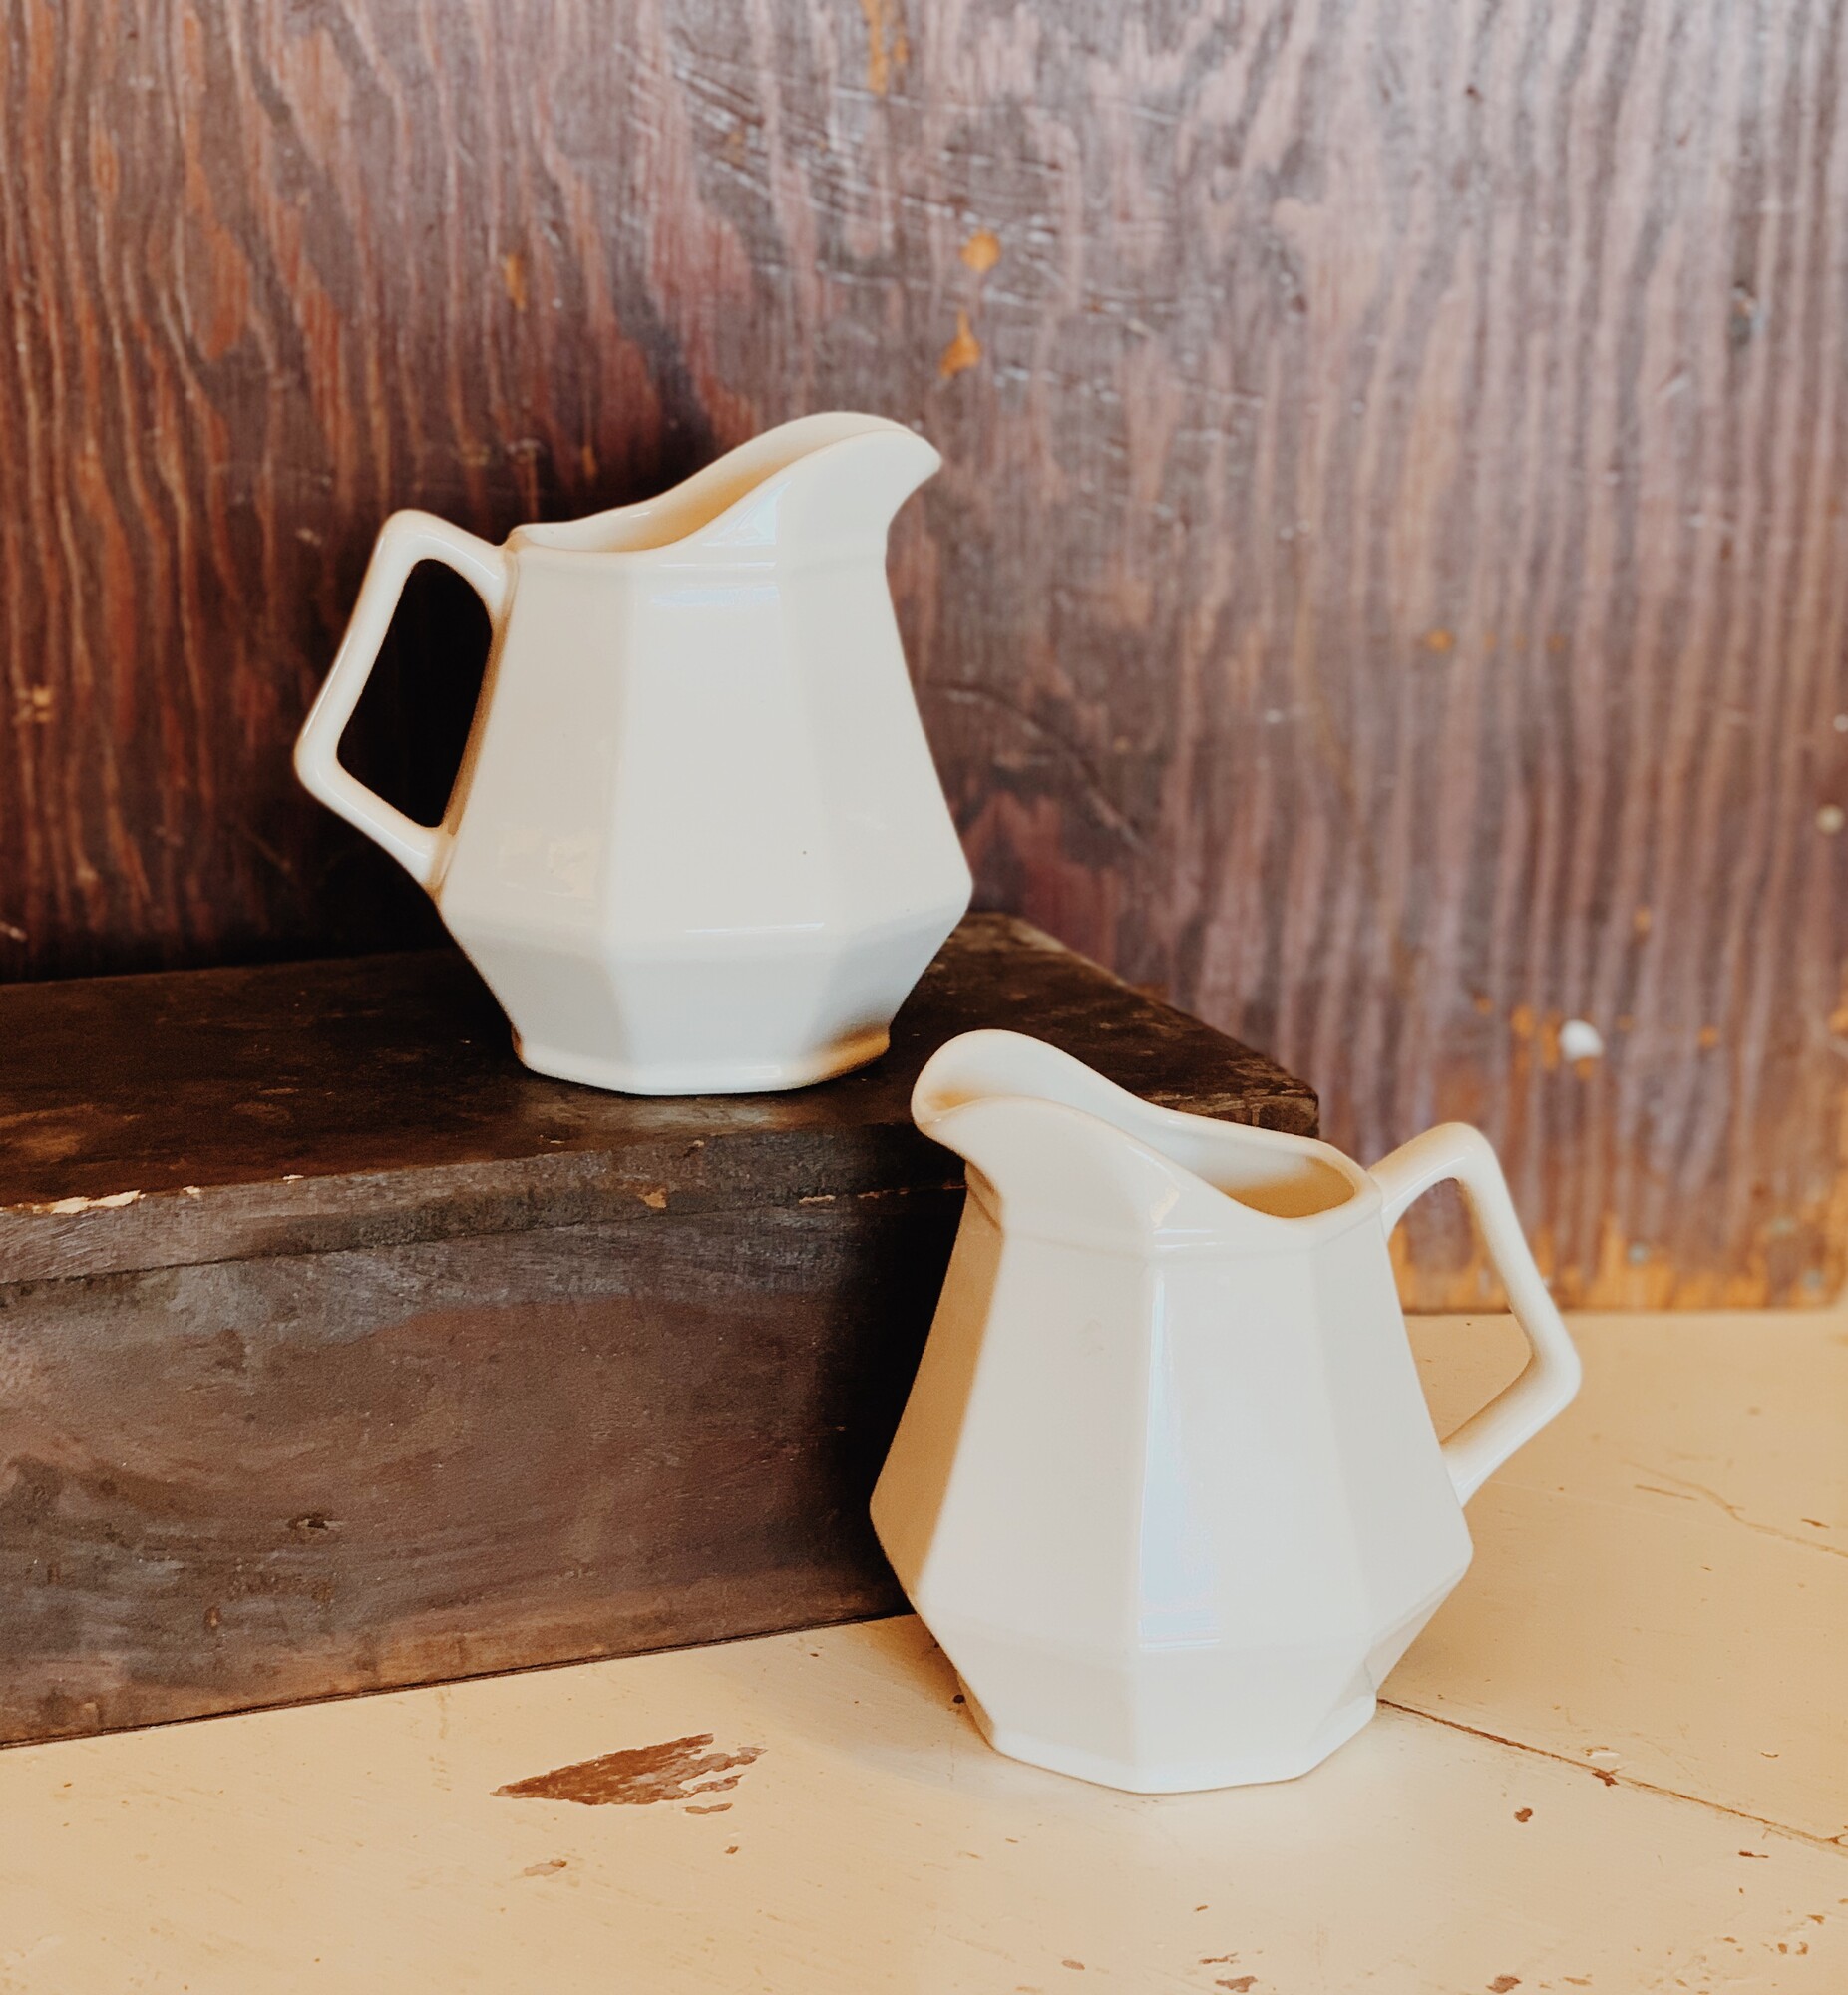 These adorable, vintage inspired cream pitchers make beautiful kitchen decor! Place these on kitchen shelves, in glass door cabinets, or use them to serve!

Measurements: 4 Inches x  4.25 Inches x 3.5 Inches